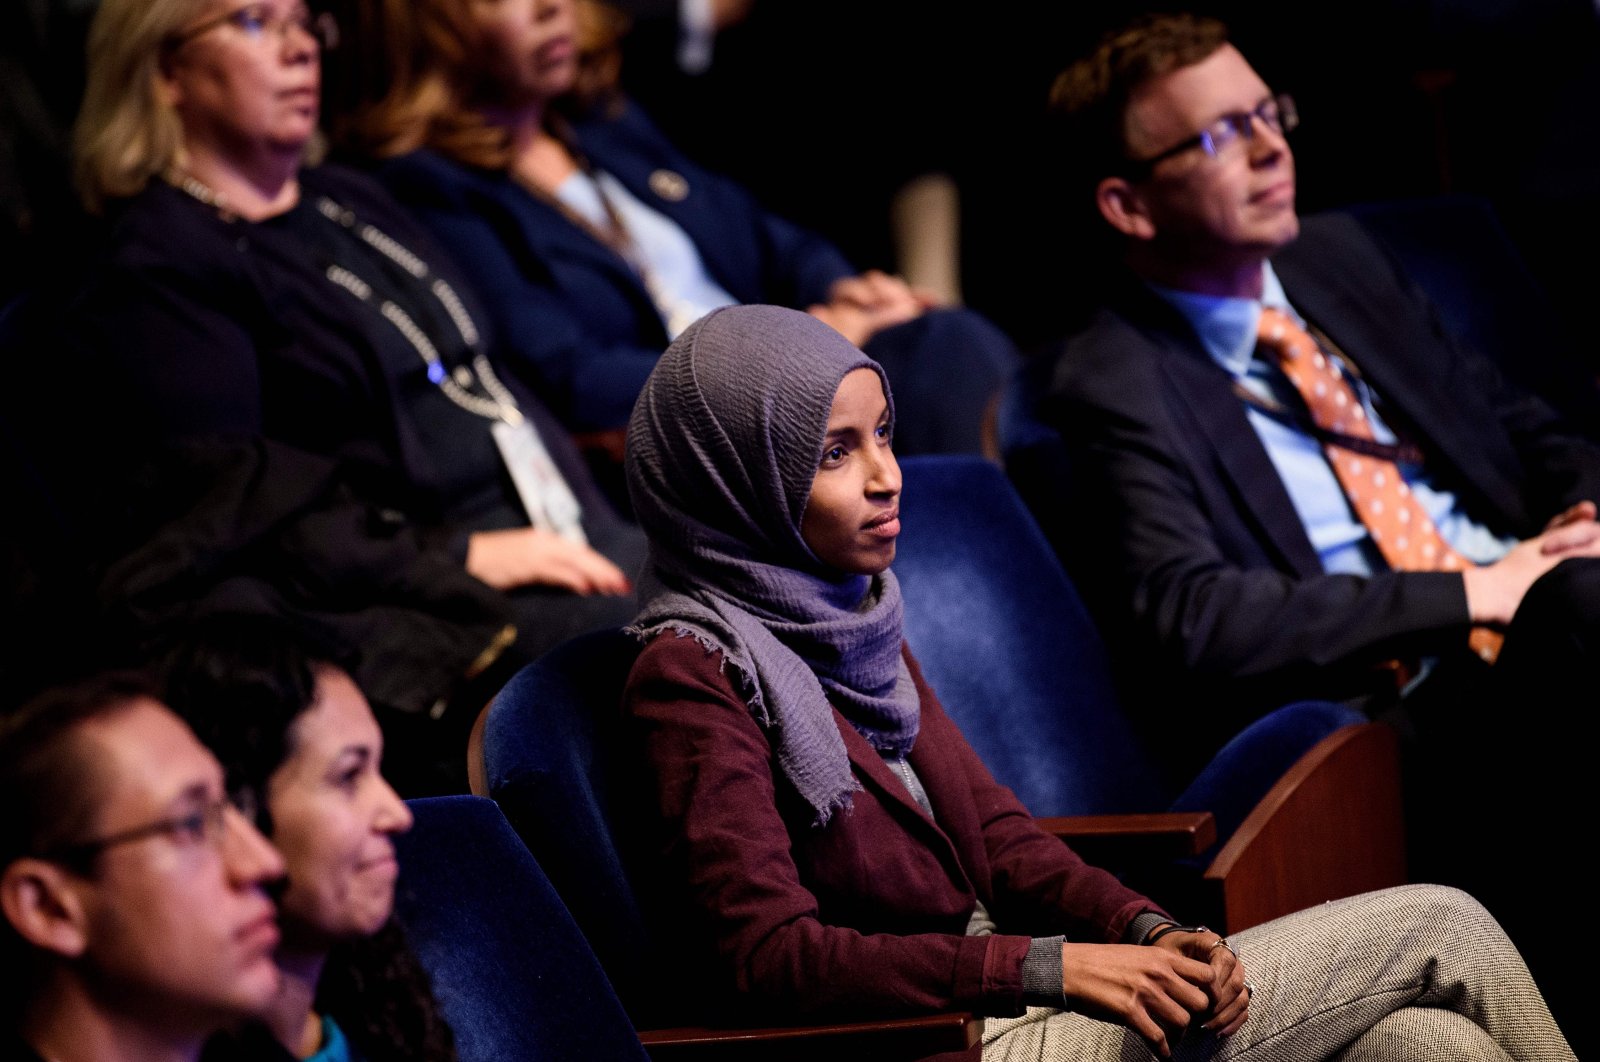 U.S. Rep. Ilhan Omar and others attend a House of Representatives member-elect welcome briefing on Capitol Hill, Washington, D.C., U.S., Nov. 15, 2018. (AFP Photo)